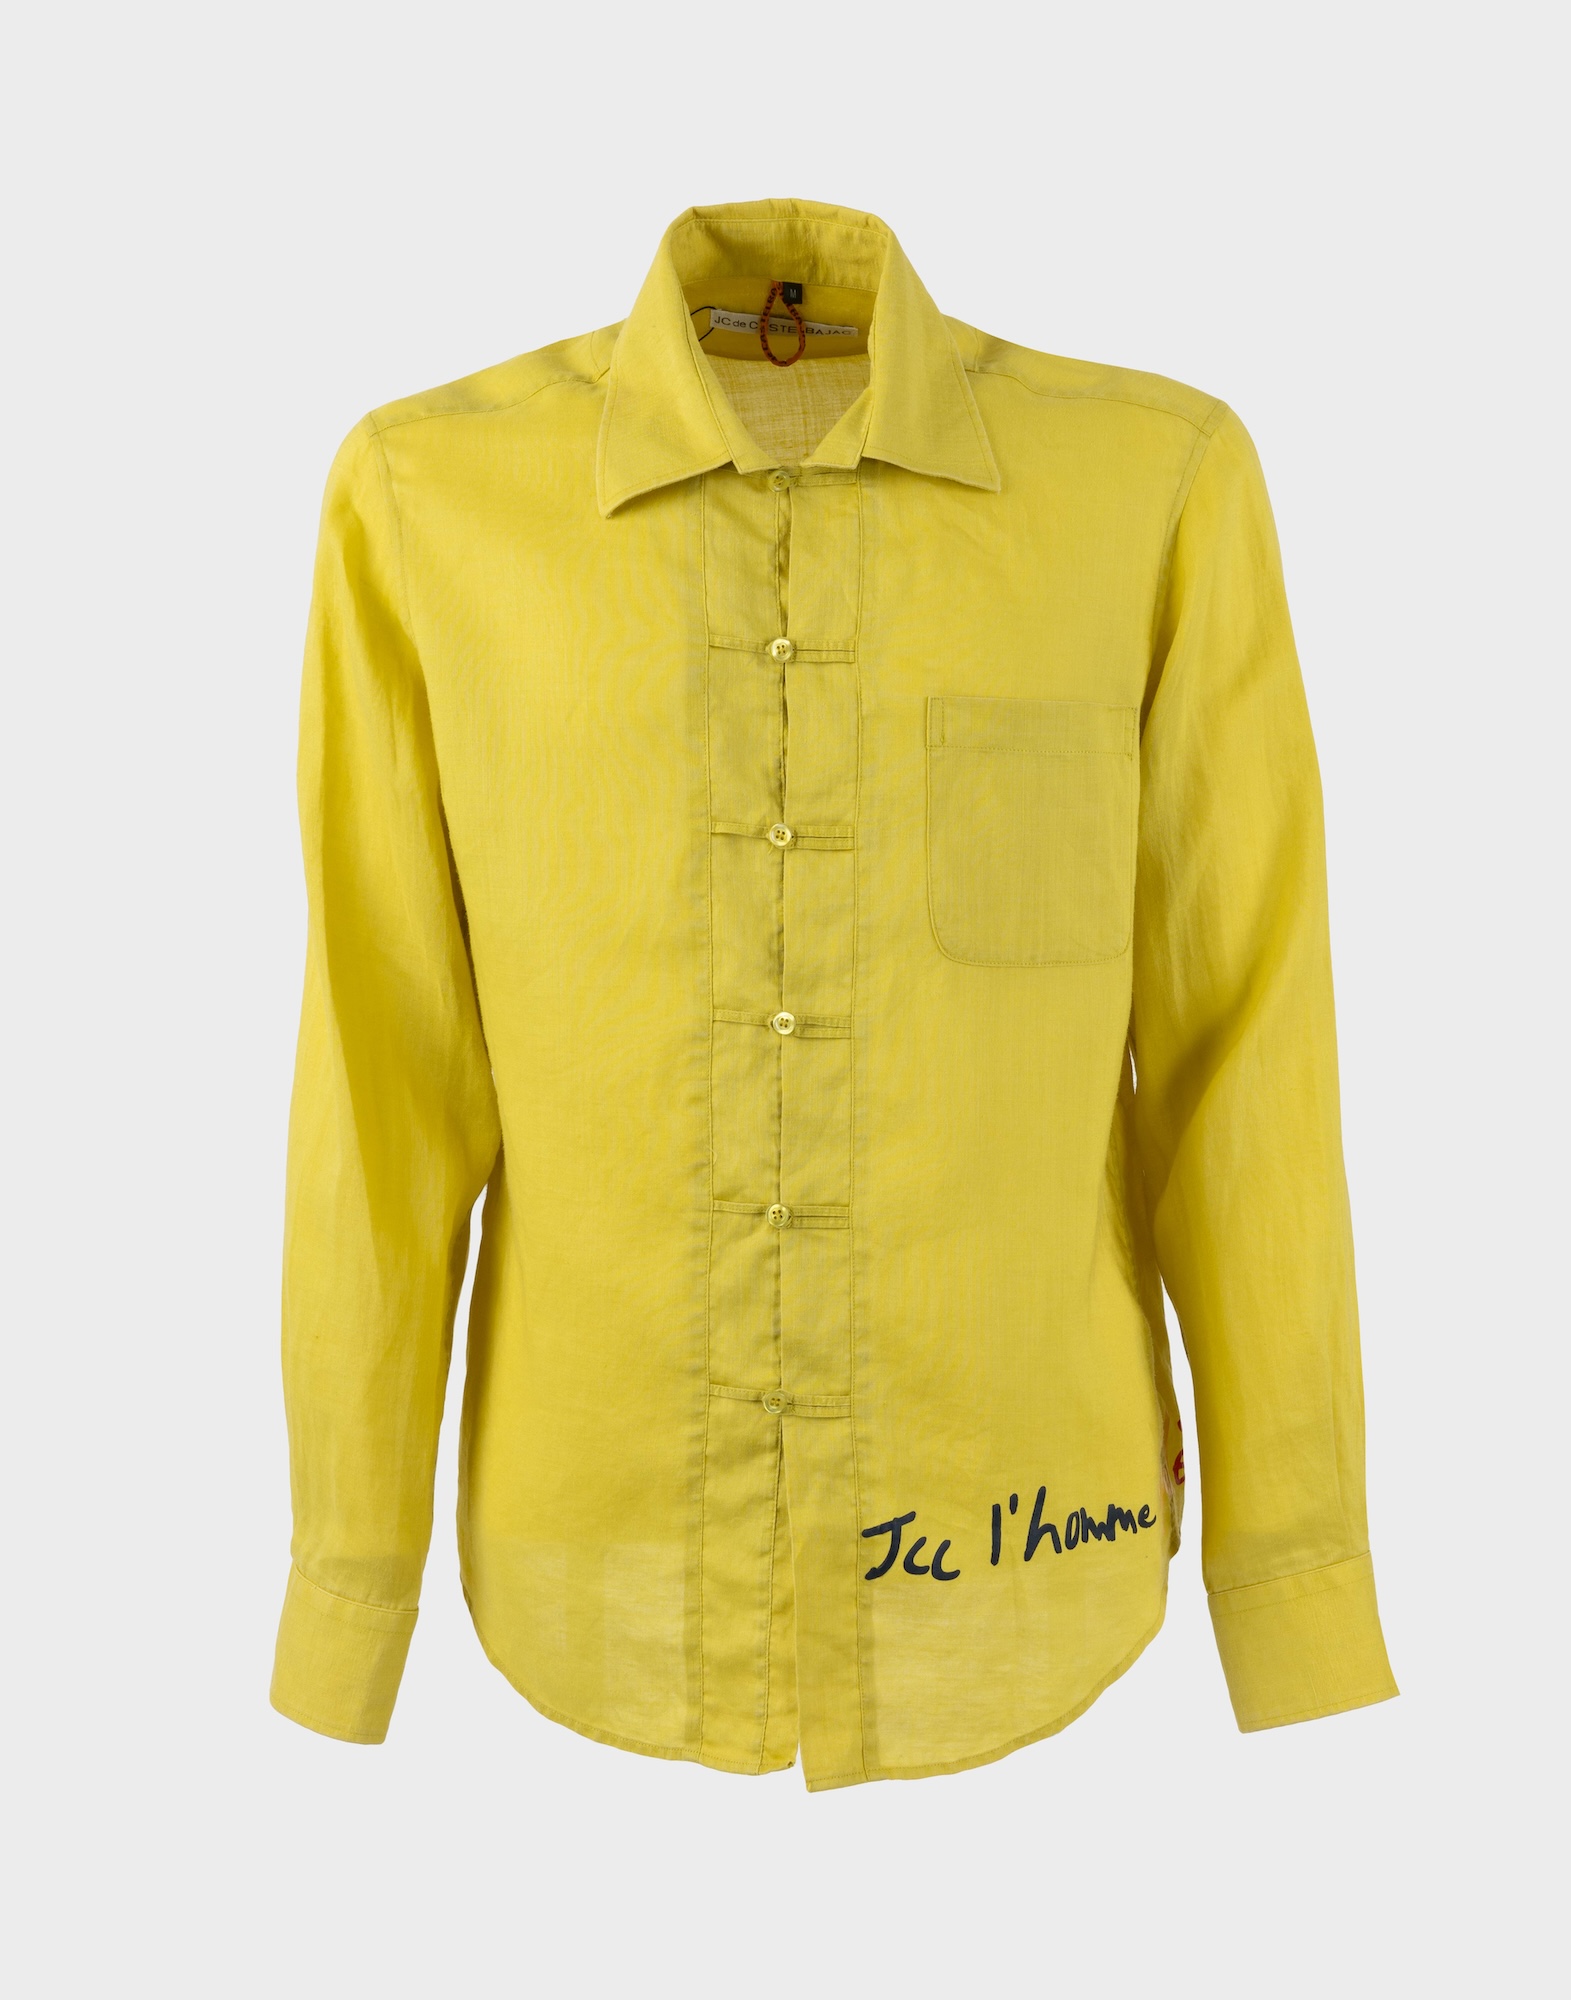 long-sleeved yellow men's shirt, button placket and logo print on the side